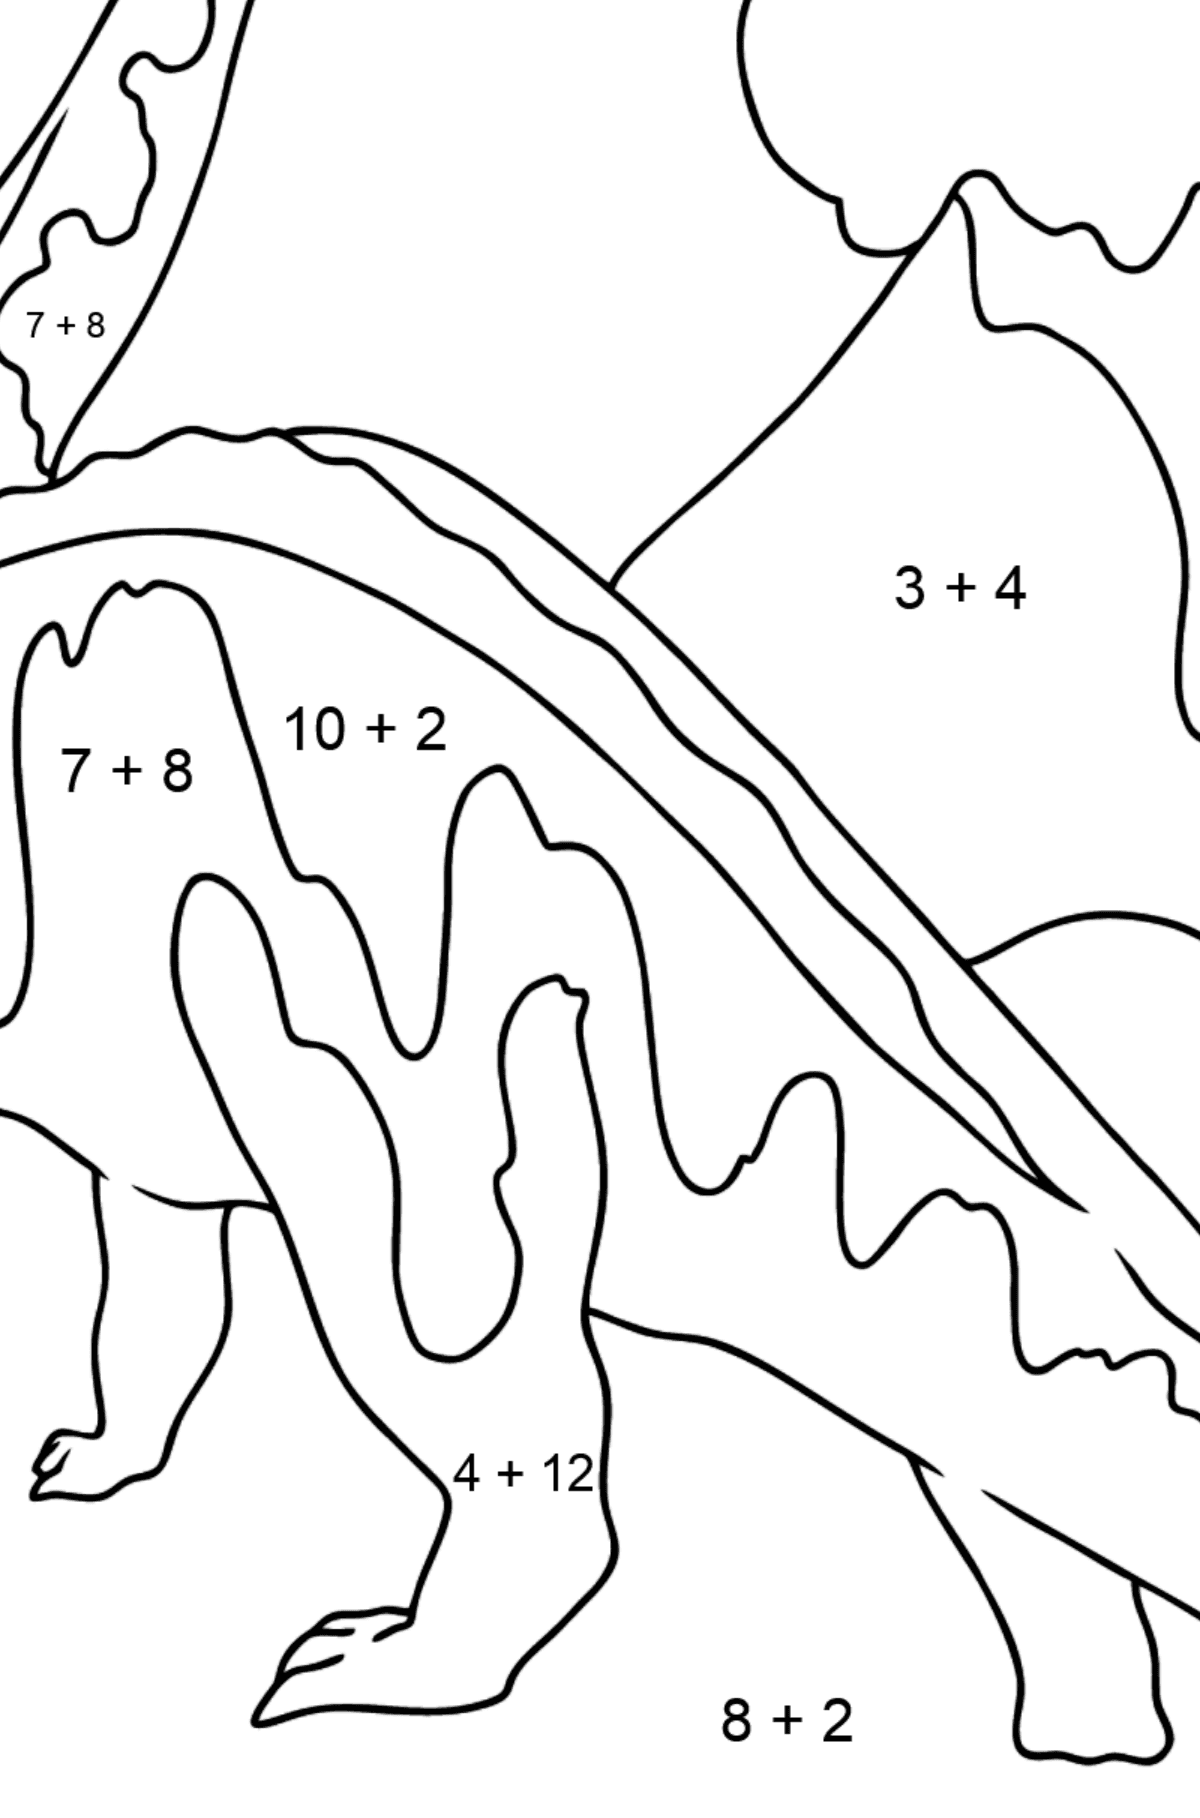 Coloring Page - Brontosaurus or a Deceiving Dinosaur - Math Coloring - Addition for Kids